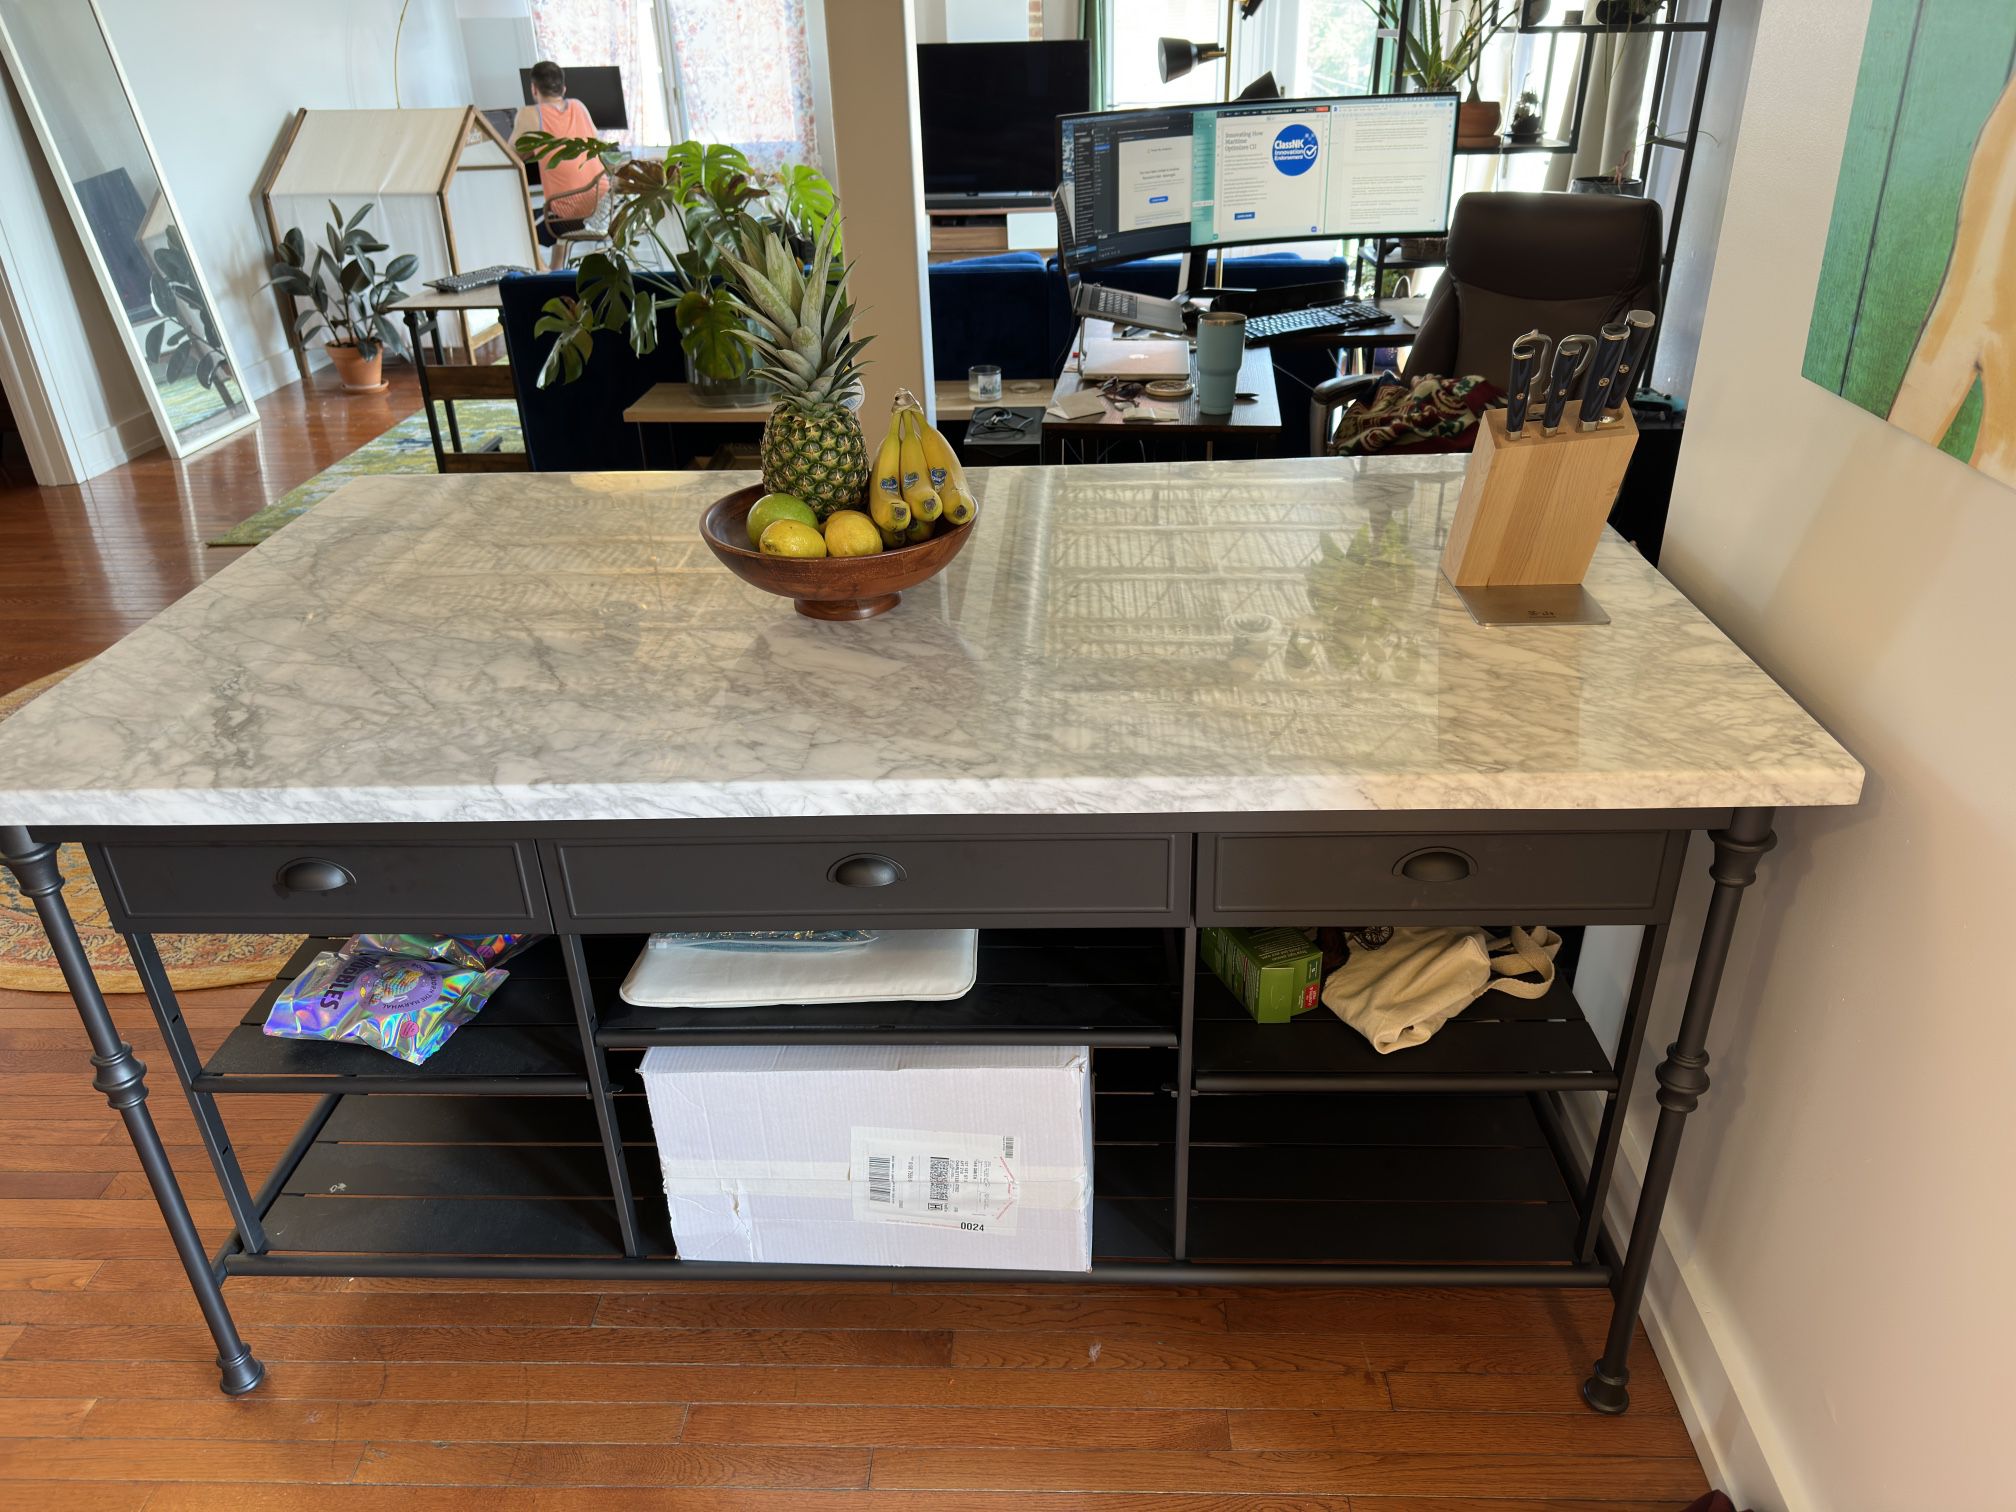 Marble Kitchen Island / Bar Table from Crate & Barrel